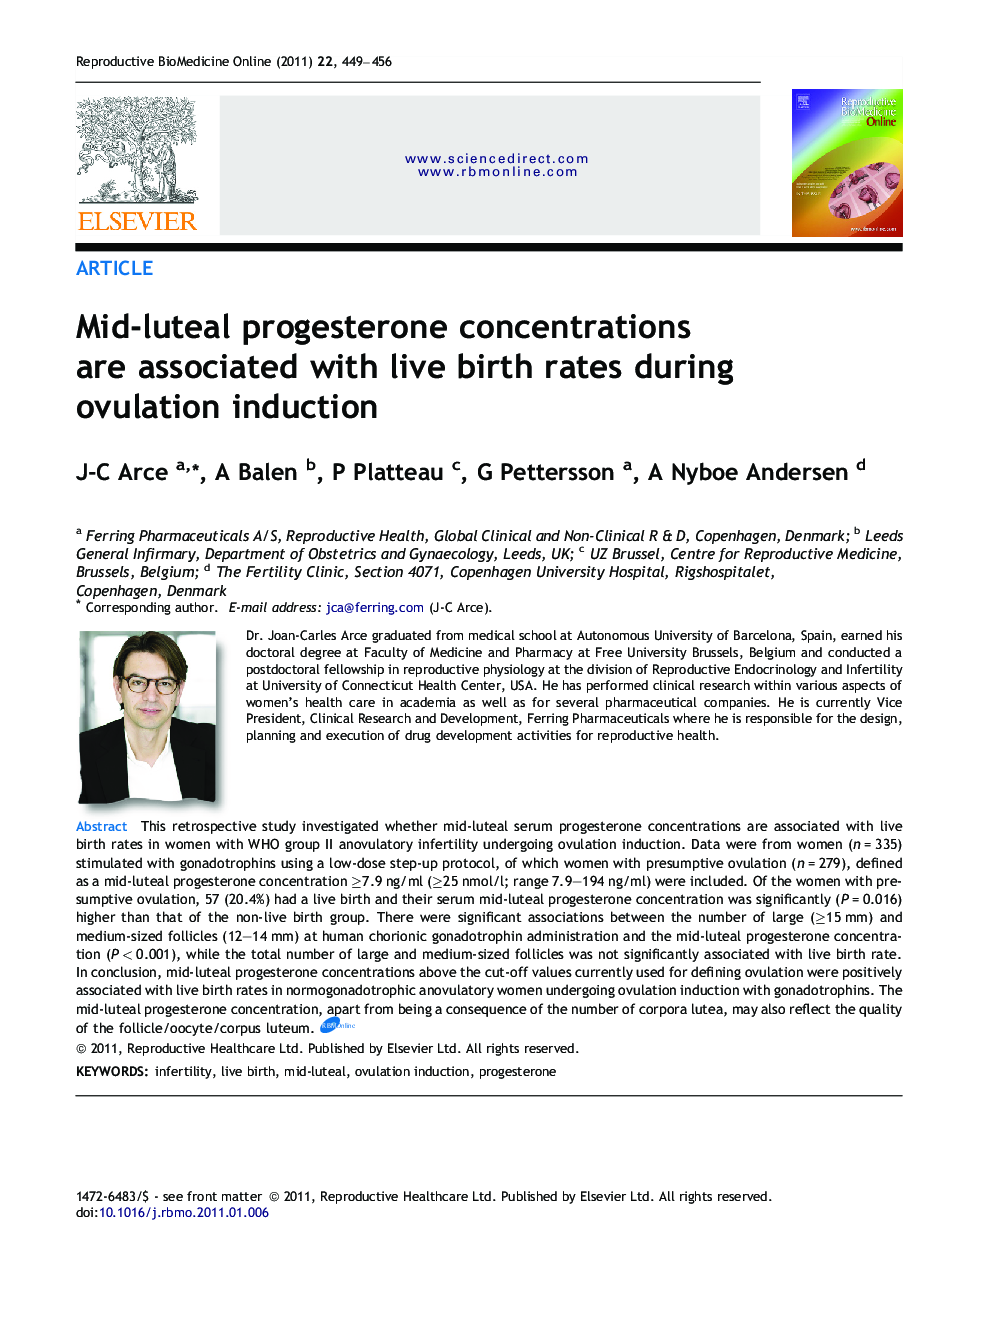 Mid-luteal progesterone concentrations are associated with live birth rates during ovulation induction